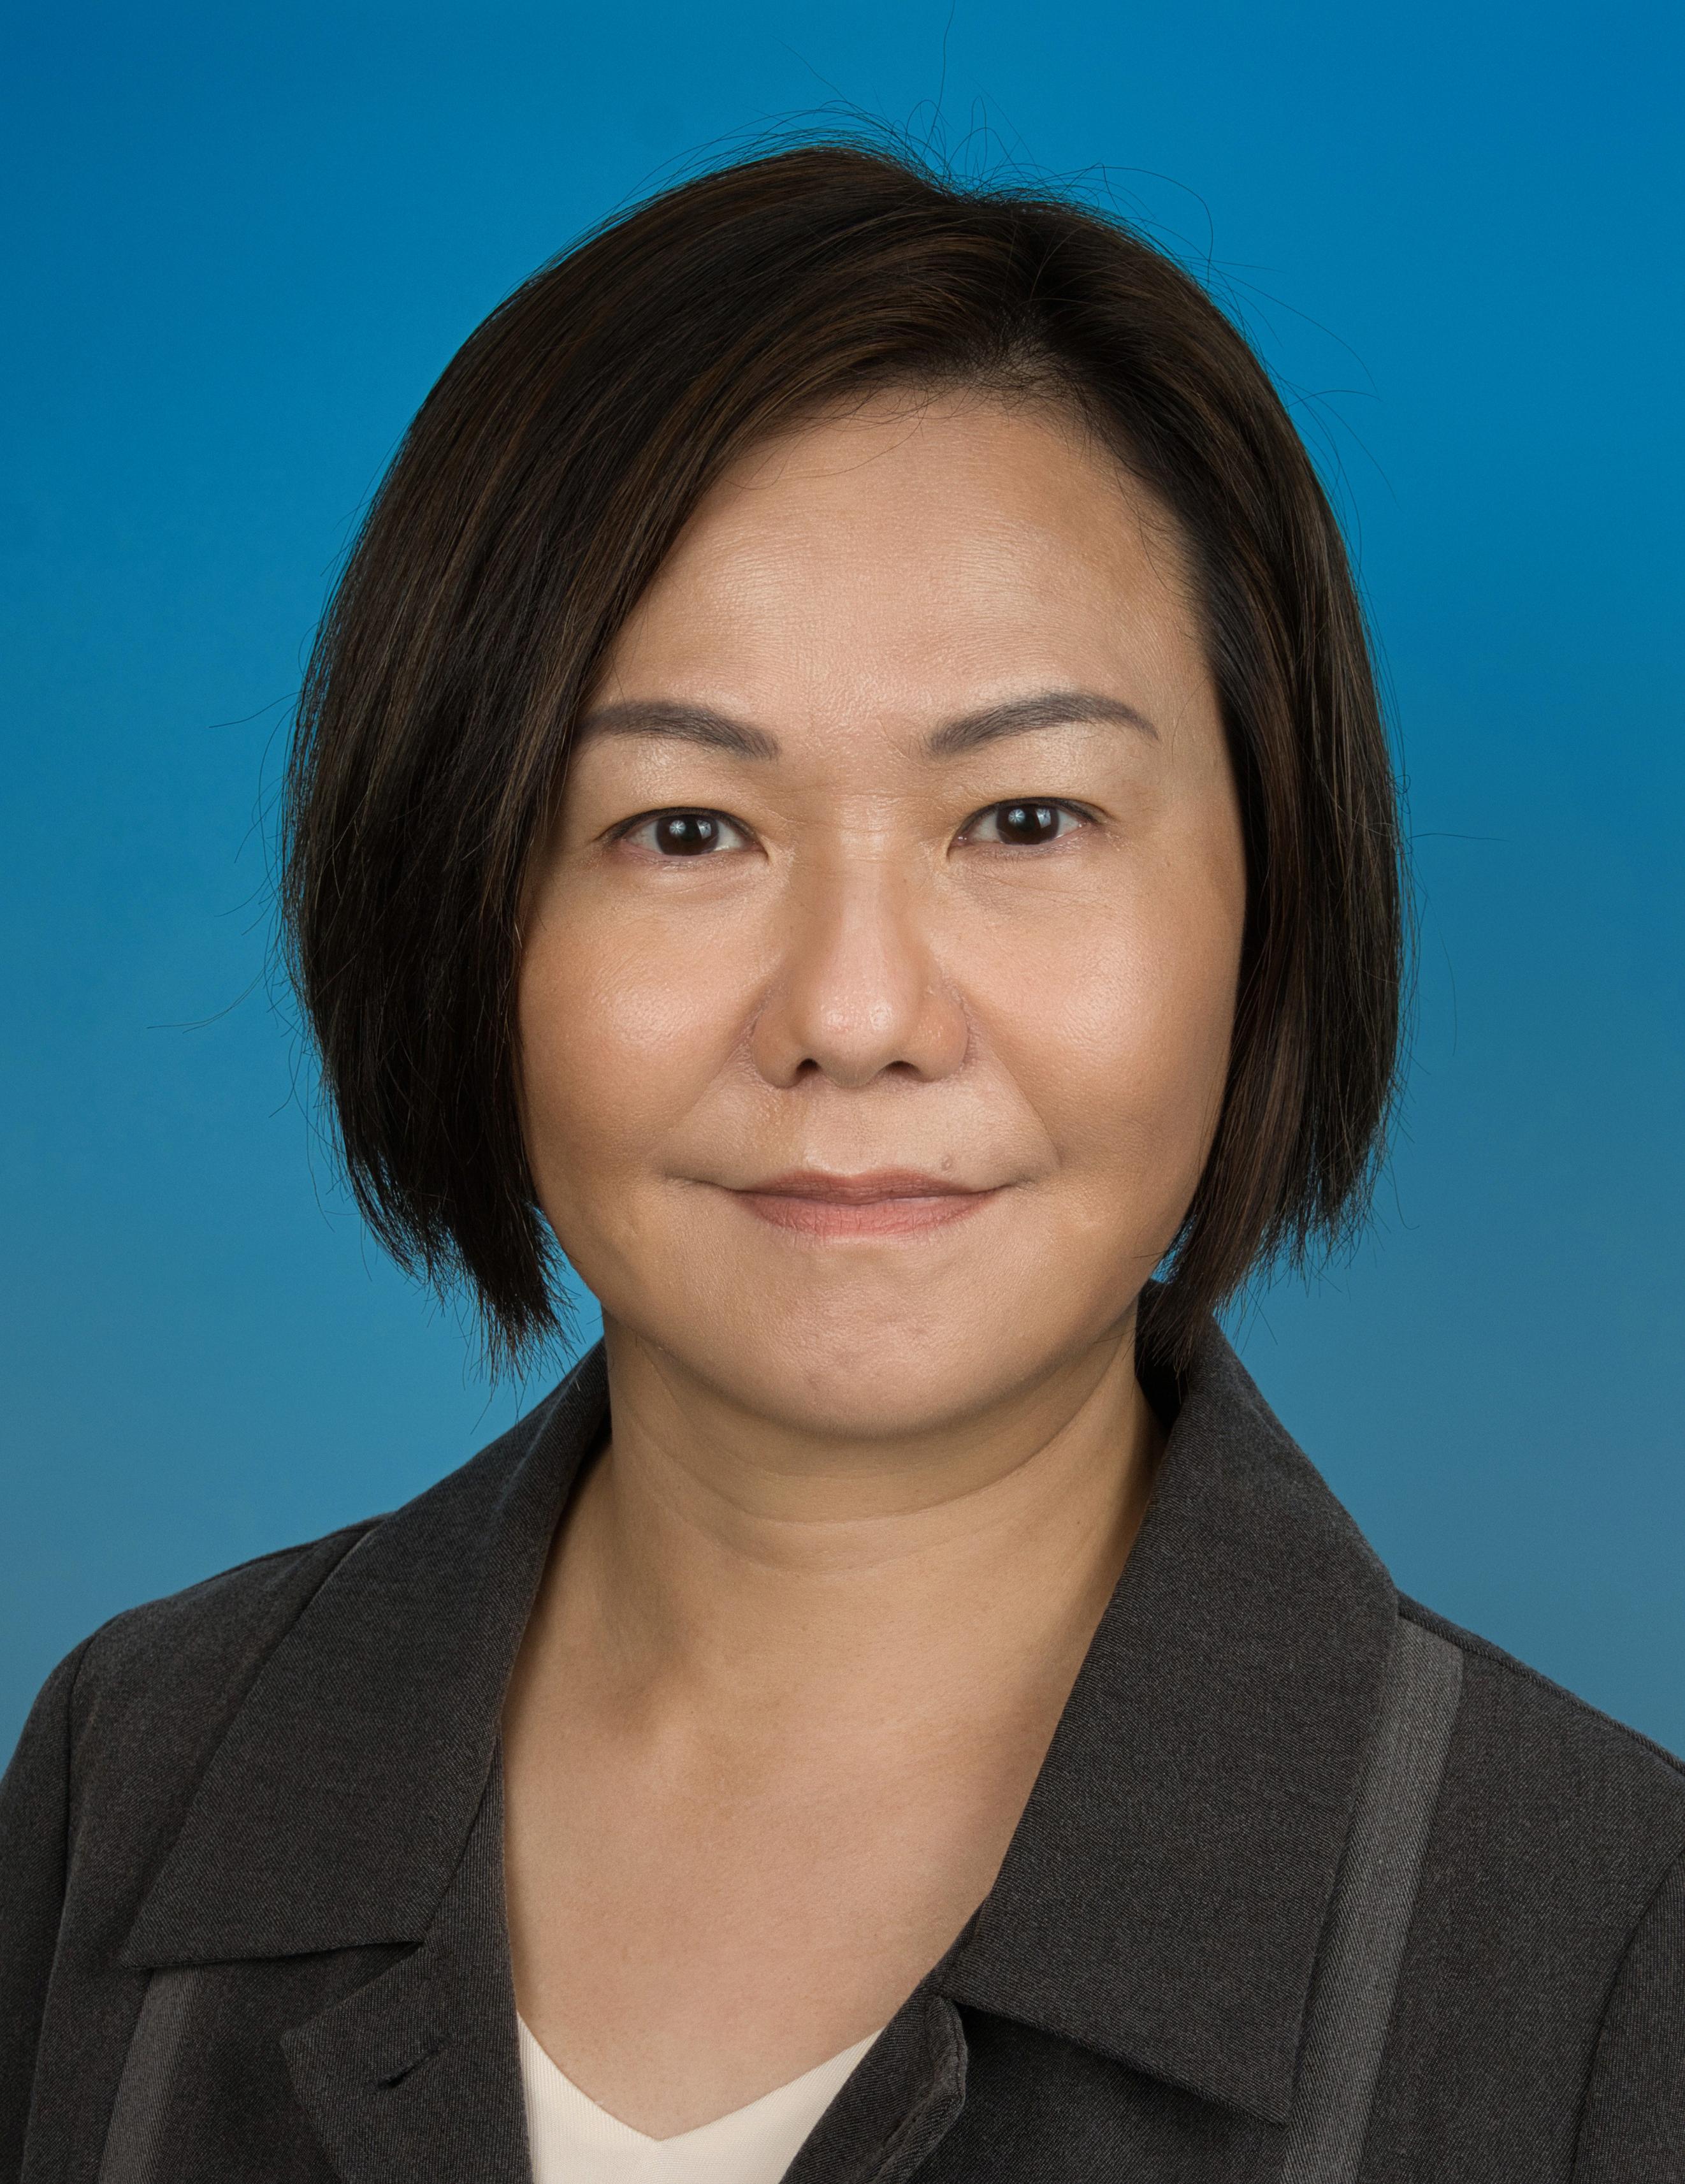 Mrs Alice Cheung Chiu Hoi-yue, Deputy Secretary for Transport and Housing (Housing)/Deputy Director of Housing (Strategy), will take up the post of Director of Home Affairs on April 6, 2022.